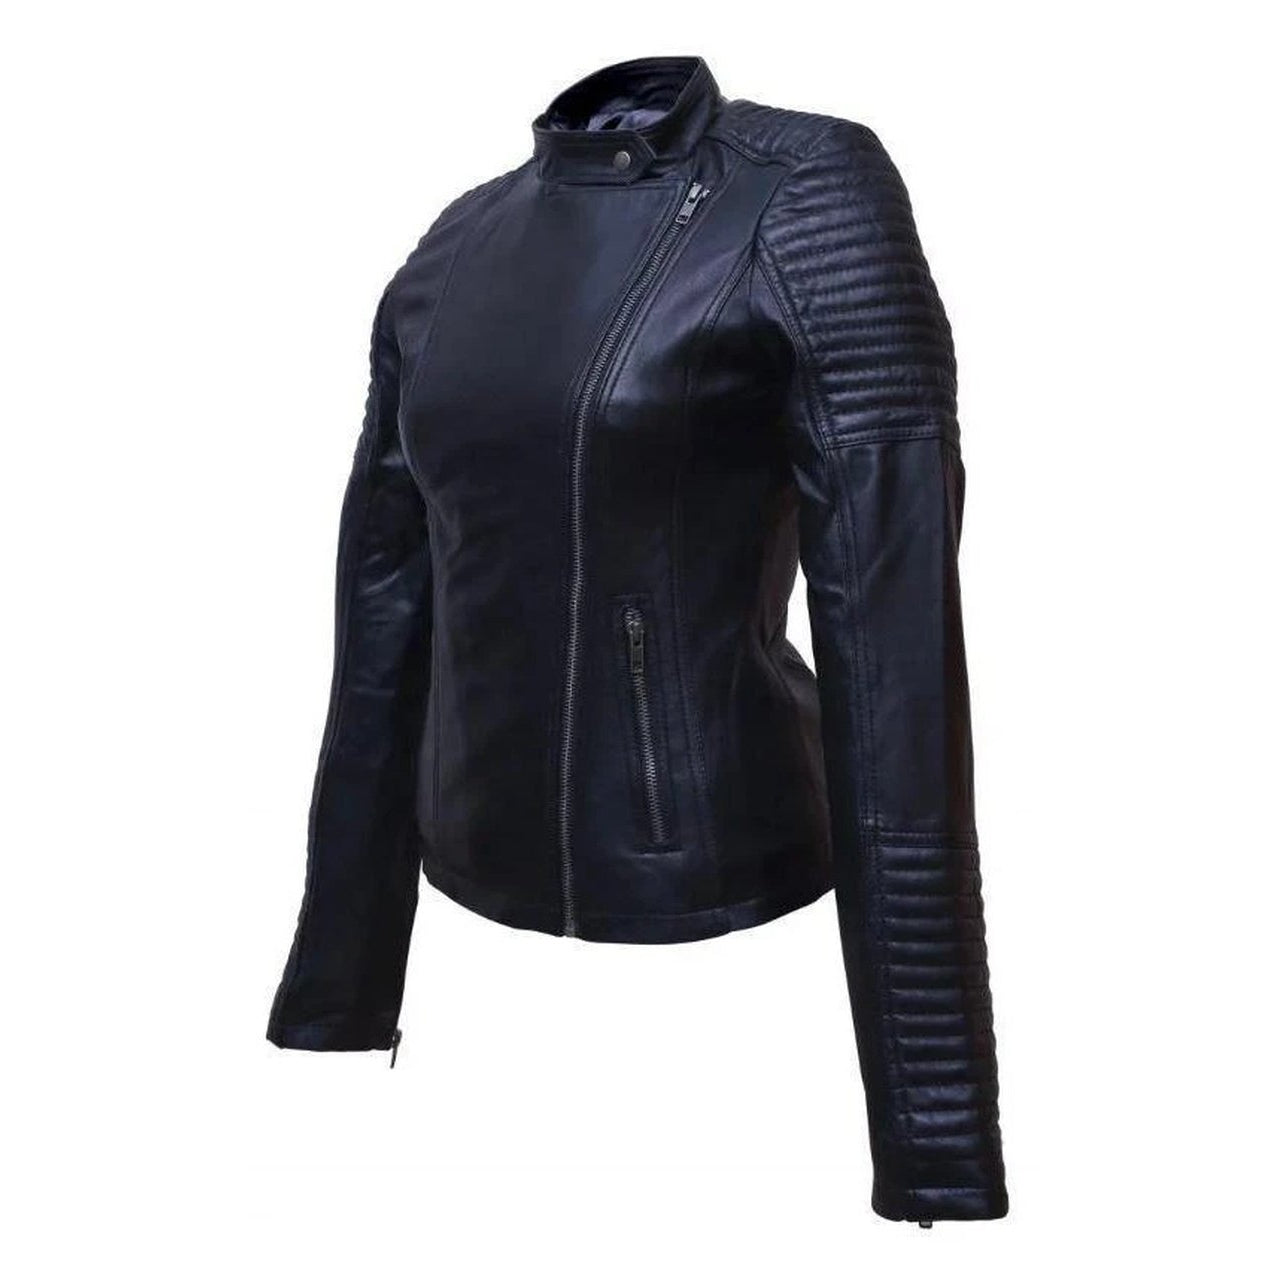 Buy F&L Black Side Zip Slim fit Leather Jacket For Women at Amazon.in